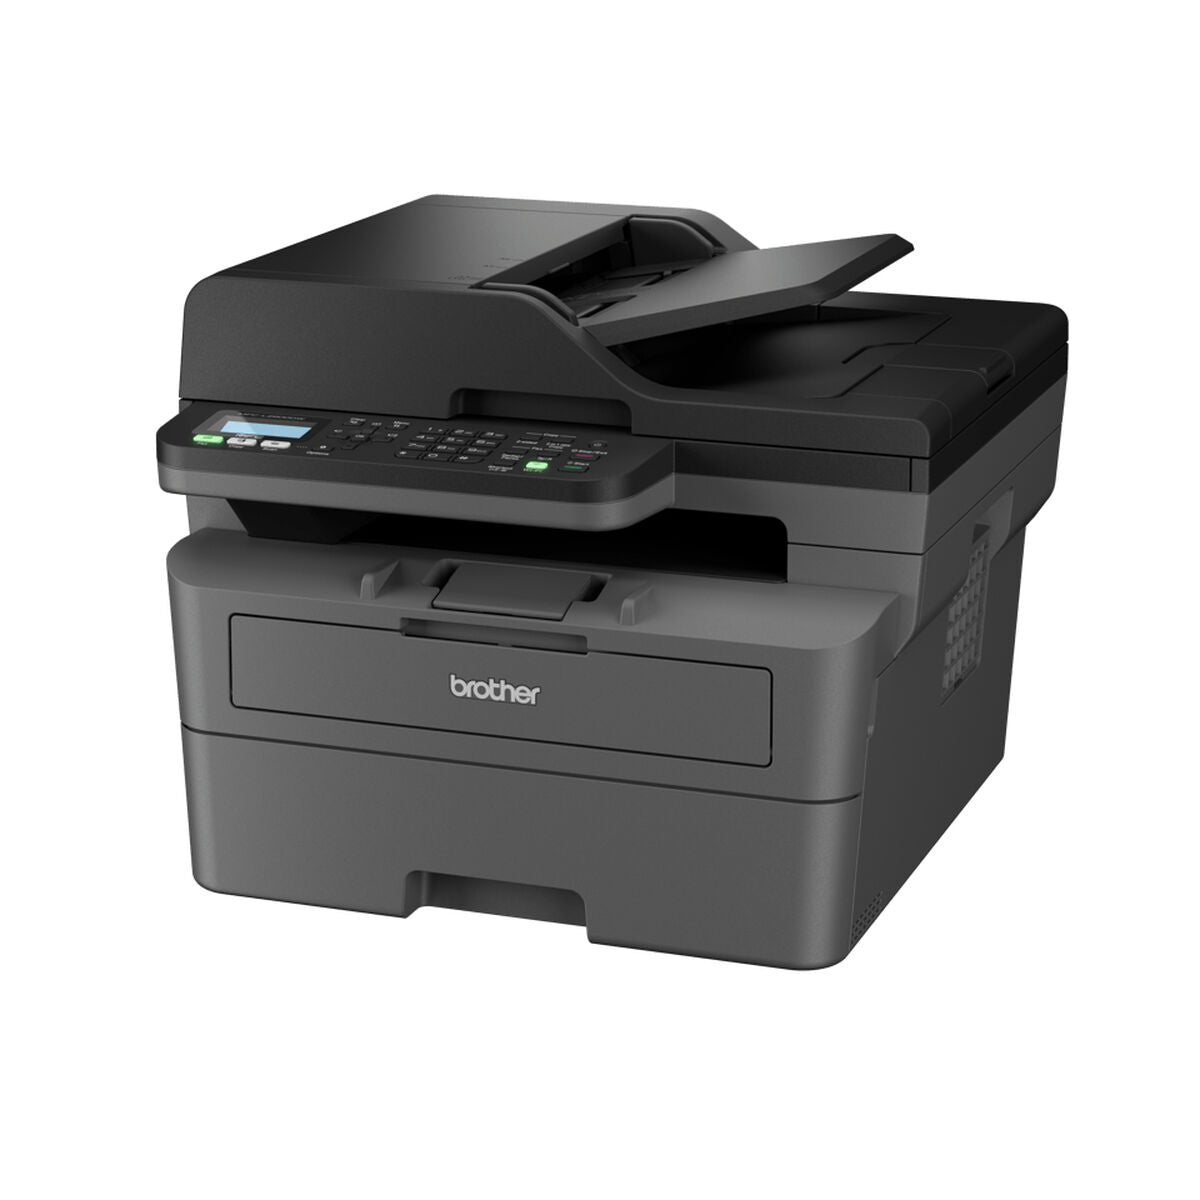 Laser Printer Brother MFC-L2827DWXL, Brother, Computing, Printers and accessories, laser-printer-brother-mfc-l2827dwxl, Brand_Brother, category-reference-2609, category-reference-2642, category-reference-2645, category-reference-t-19685, category-reference-t-19911, category-reference-t-21378, category-reference-t-25692, computers / peripherals, Condition_NEW, office, Price_300 - 400, Teleworking, RiotNook